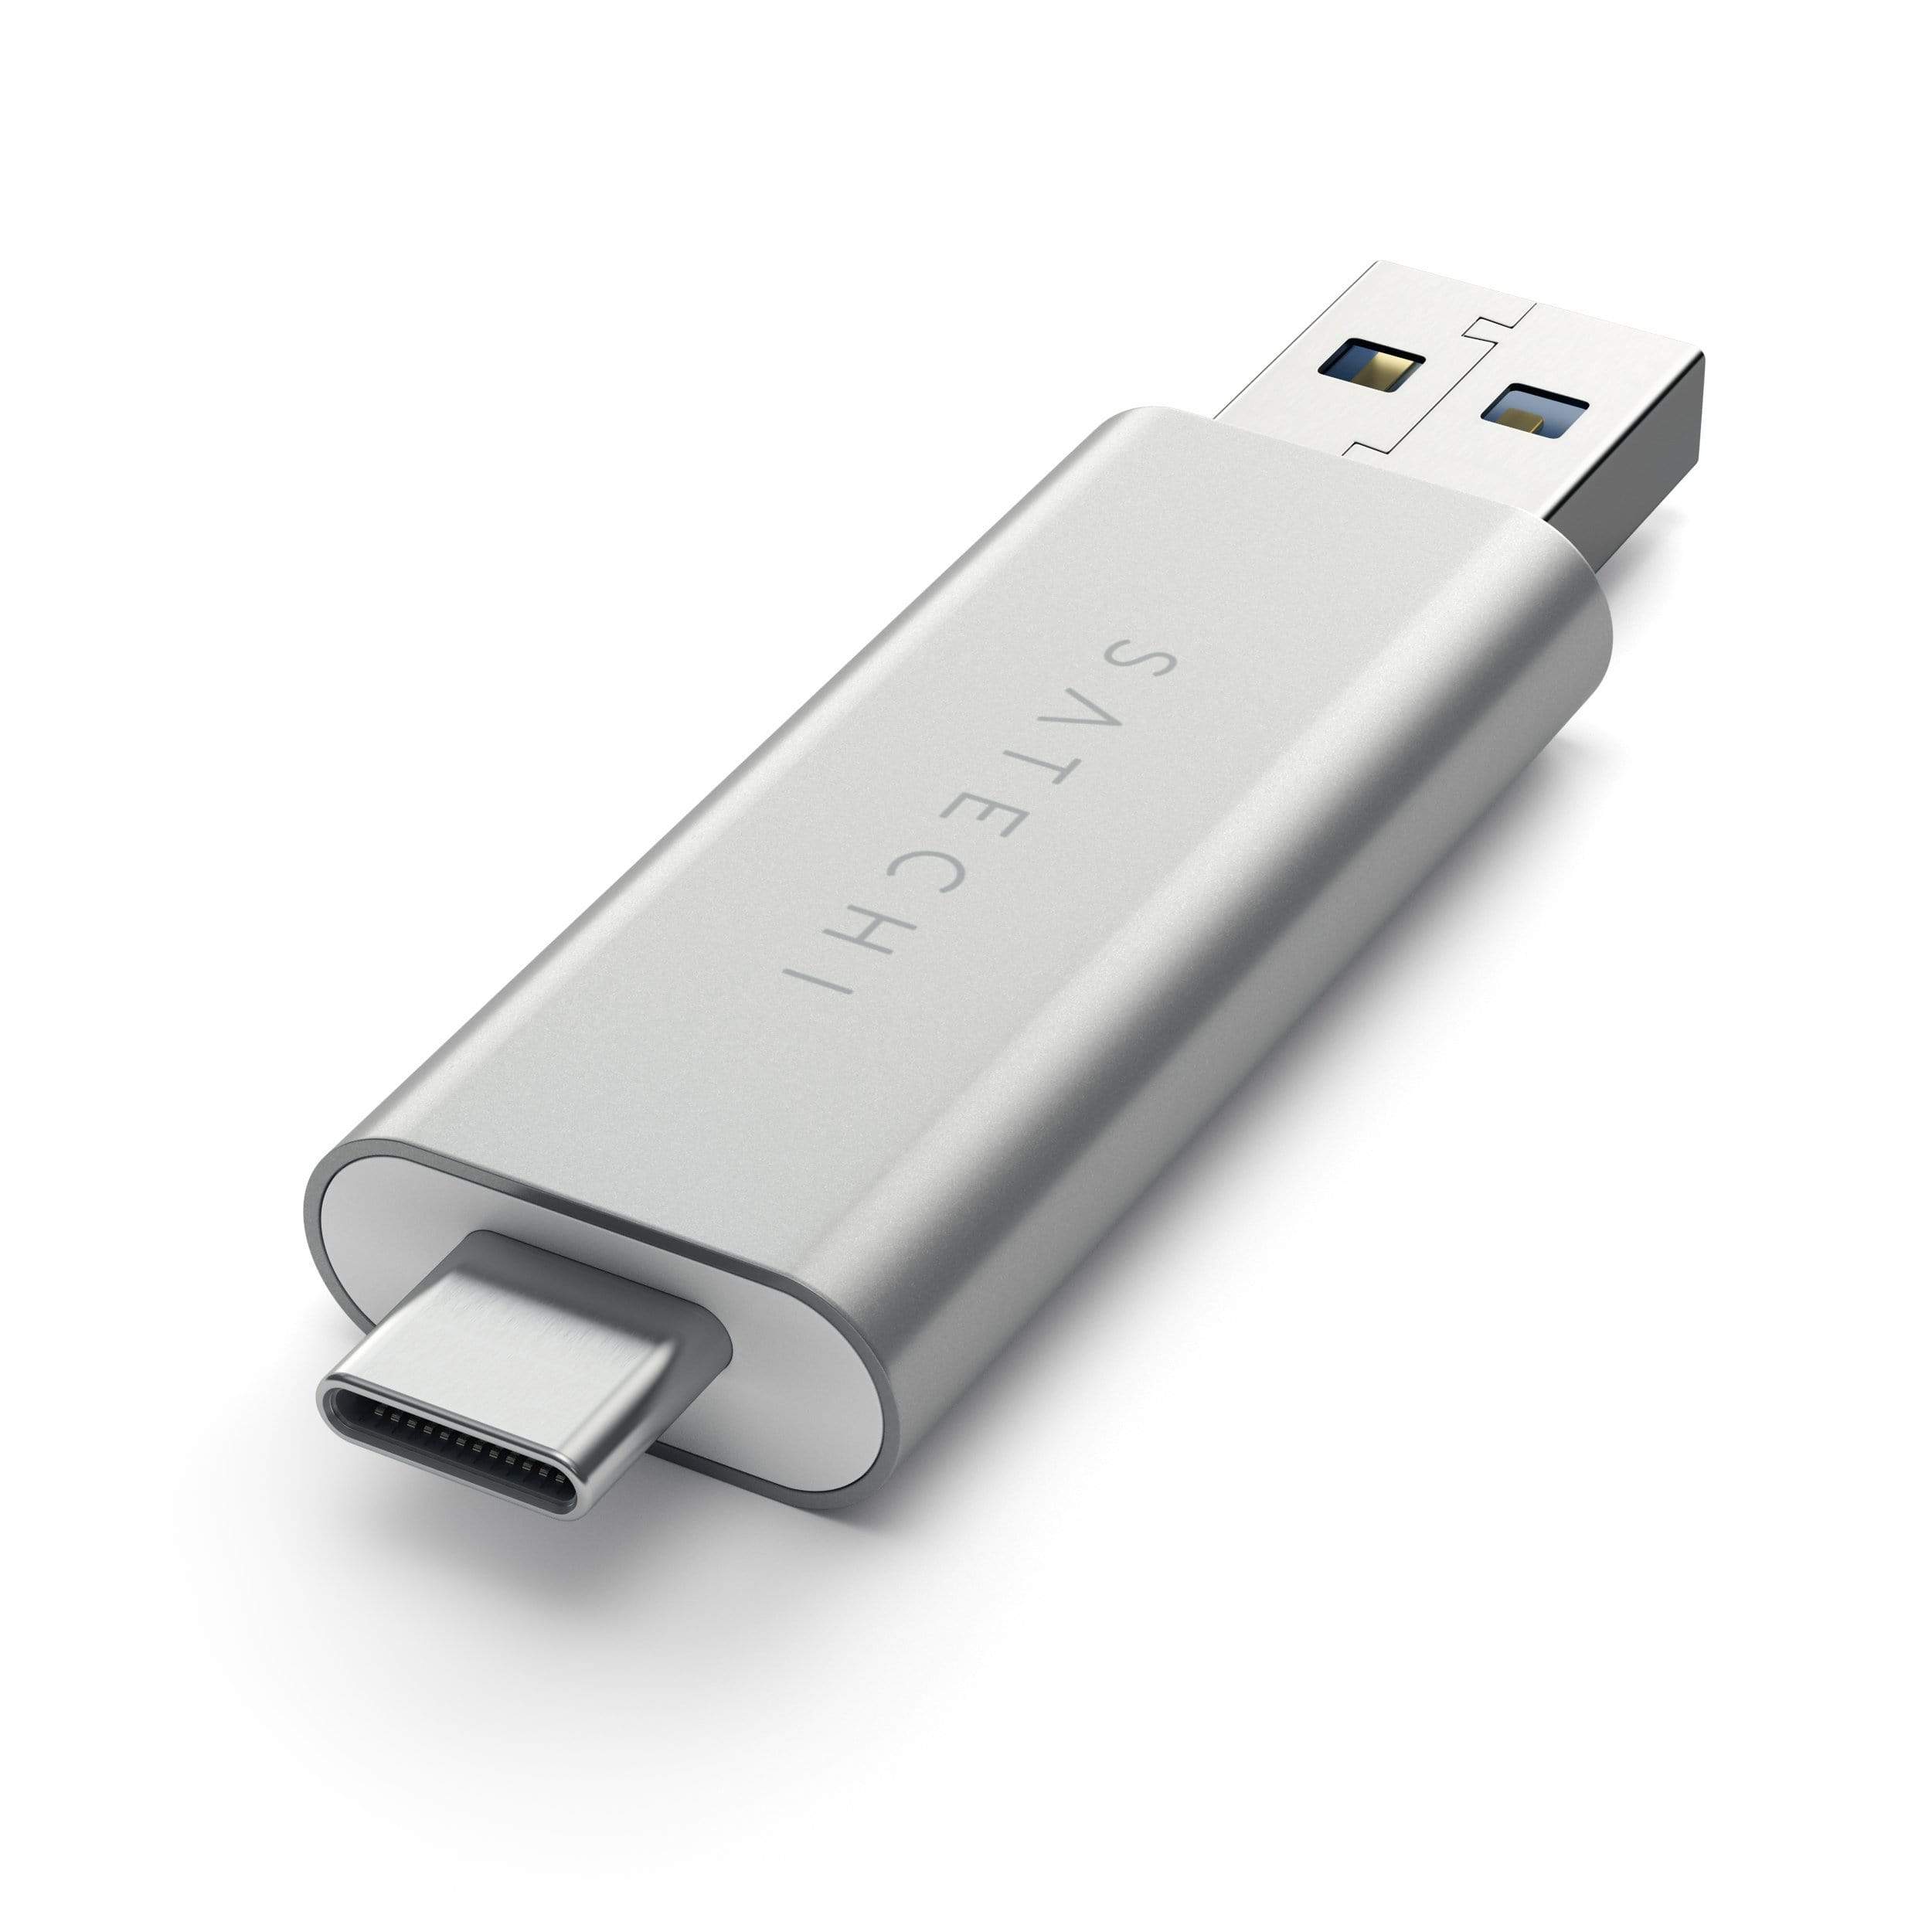 Aluminum Type-C USB 3.0 and Micro/SD Card Reader for Type-C Devices Hubs Satechi Silver 